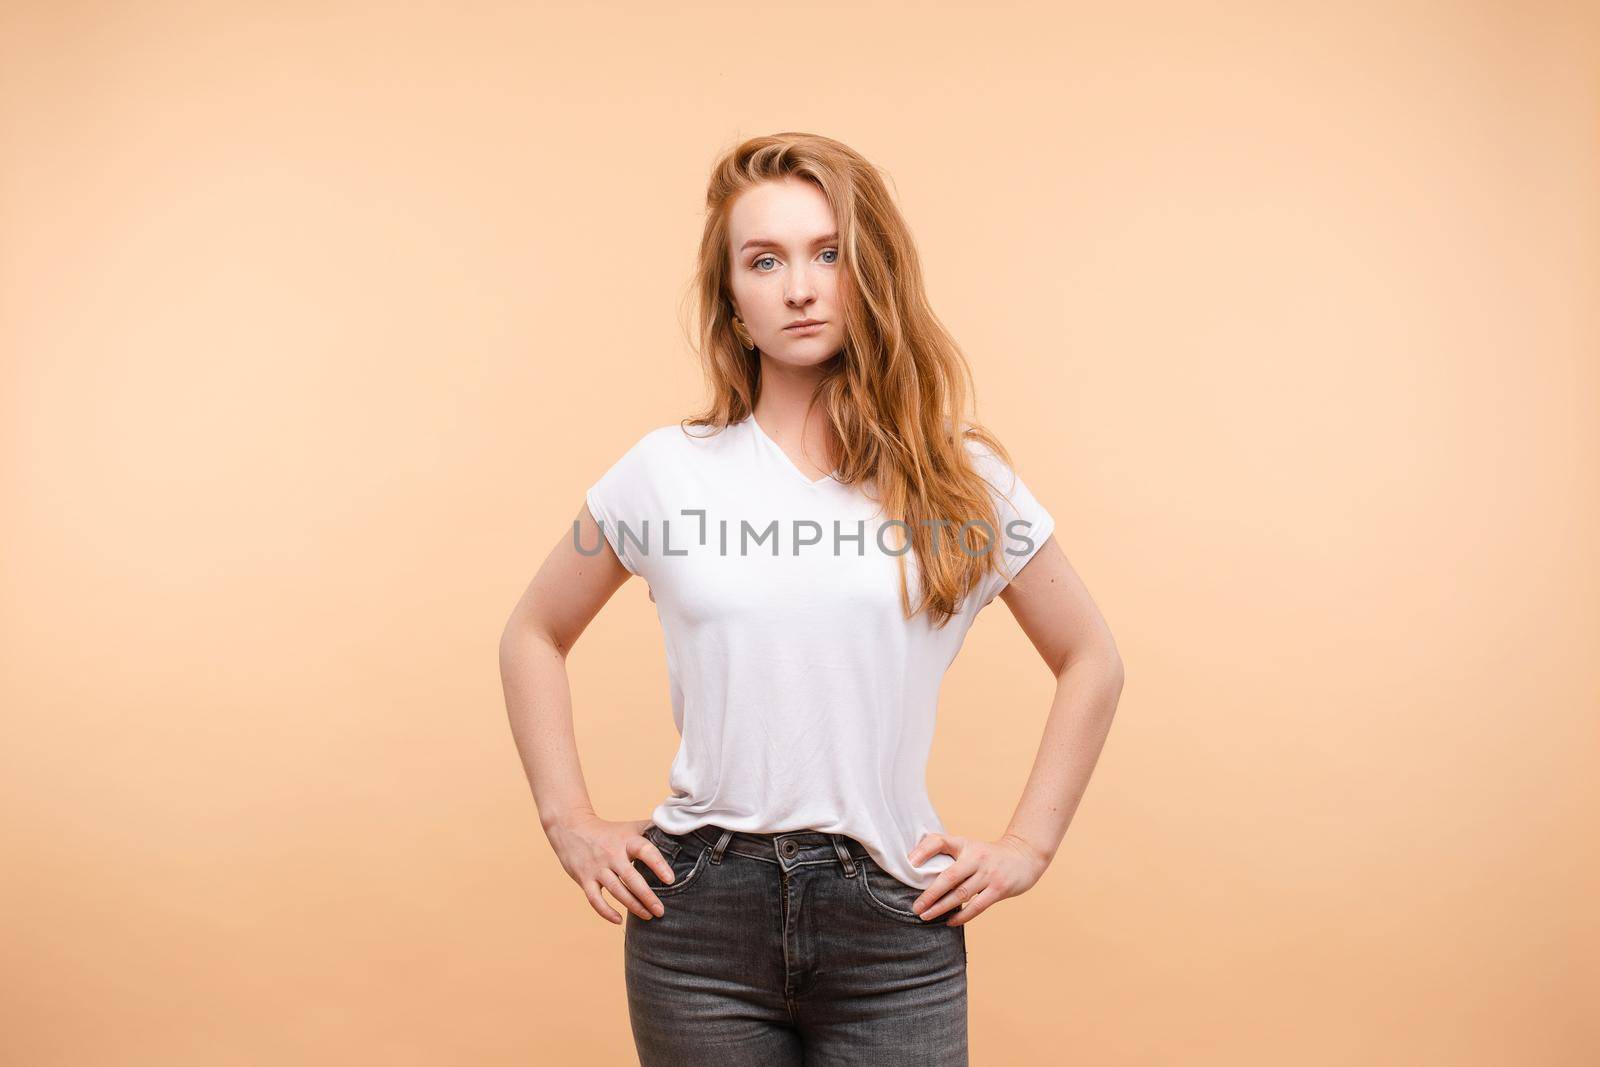 Front view of young serious woman wearing white shirt and jeans standing on isolated background. Calm confident female looking at camera in studio. Concept of casual outfit and expression.